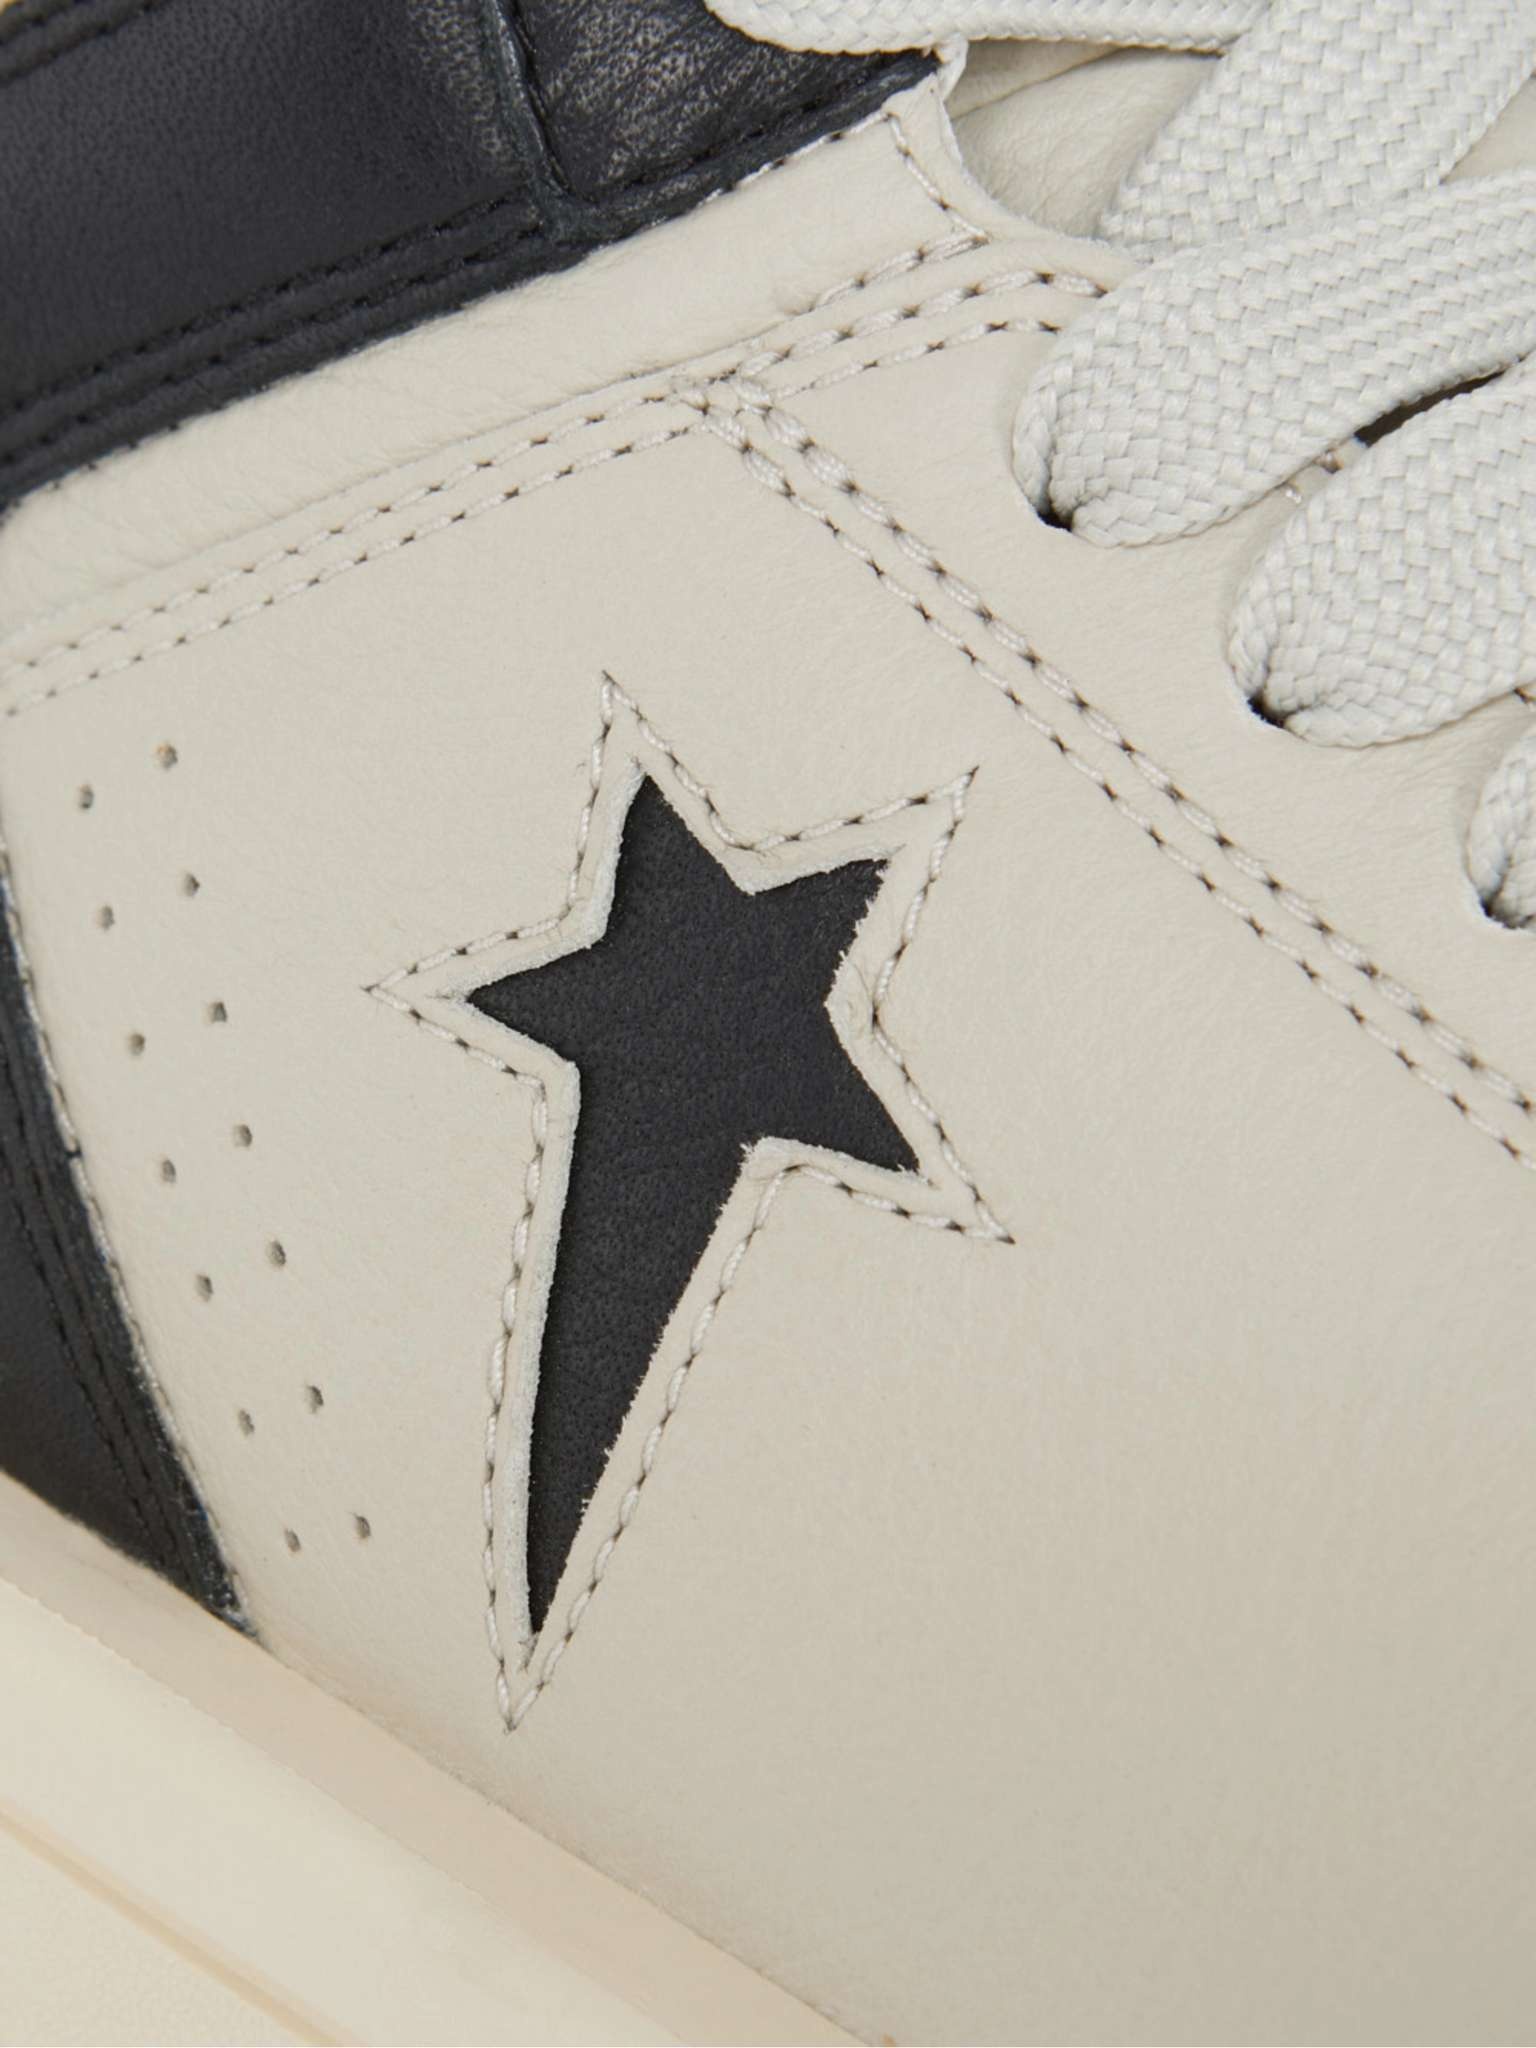 + Converse Turbowpn Leather High-Top Sneakers - 4